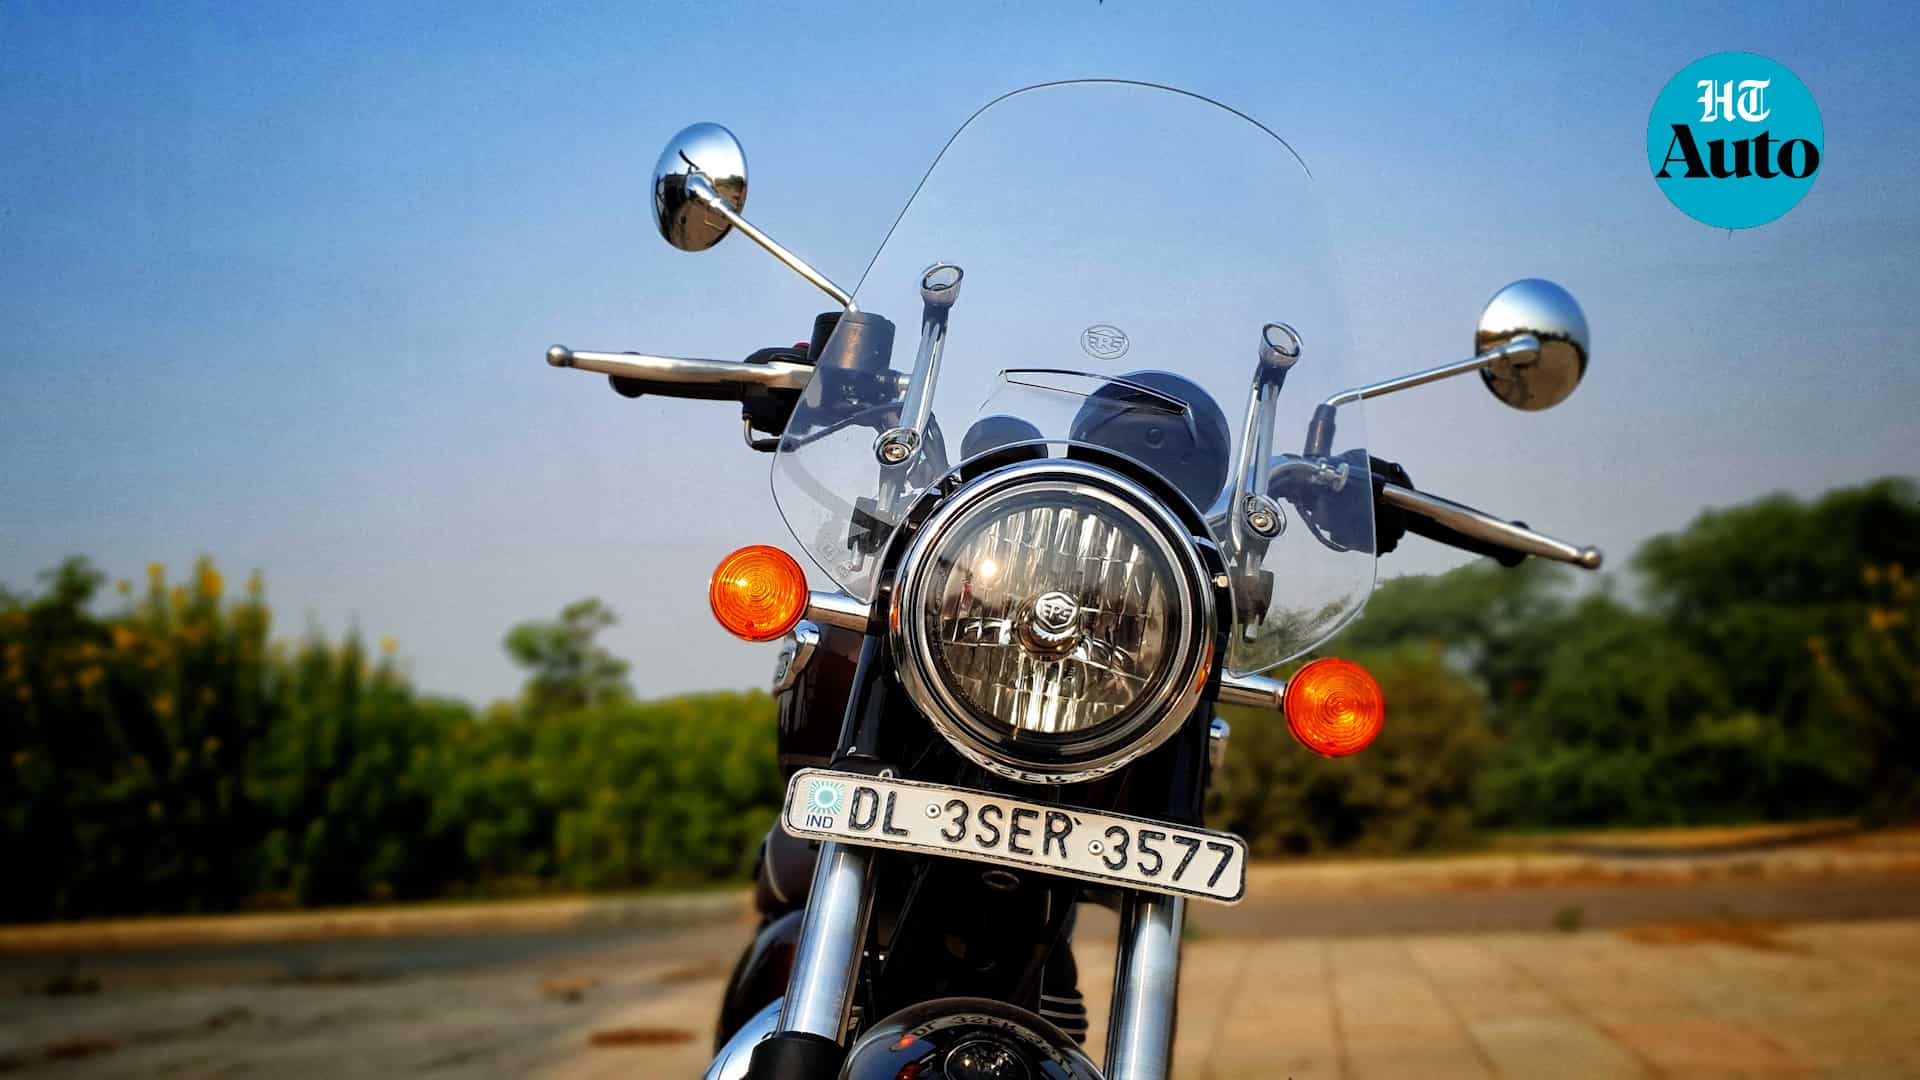 In pics: Royal Enfield launches Meteor 350 retro cruiser